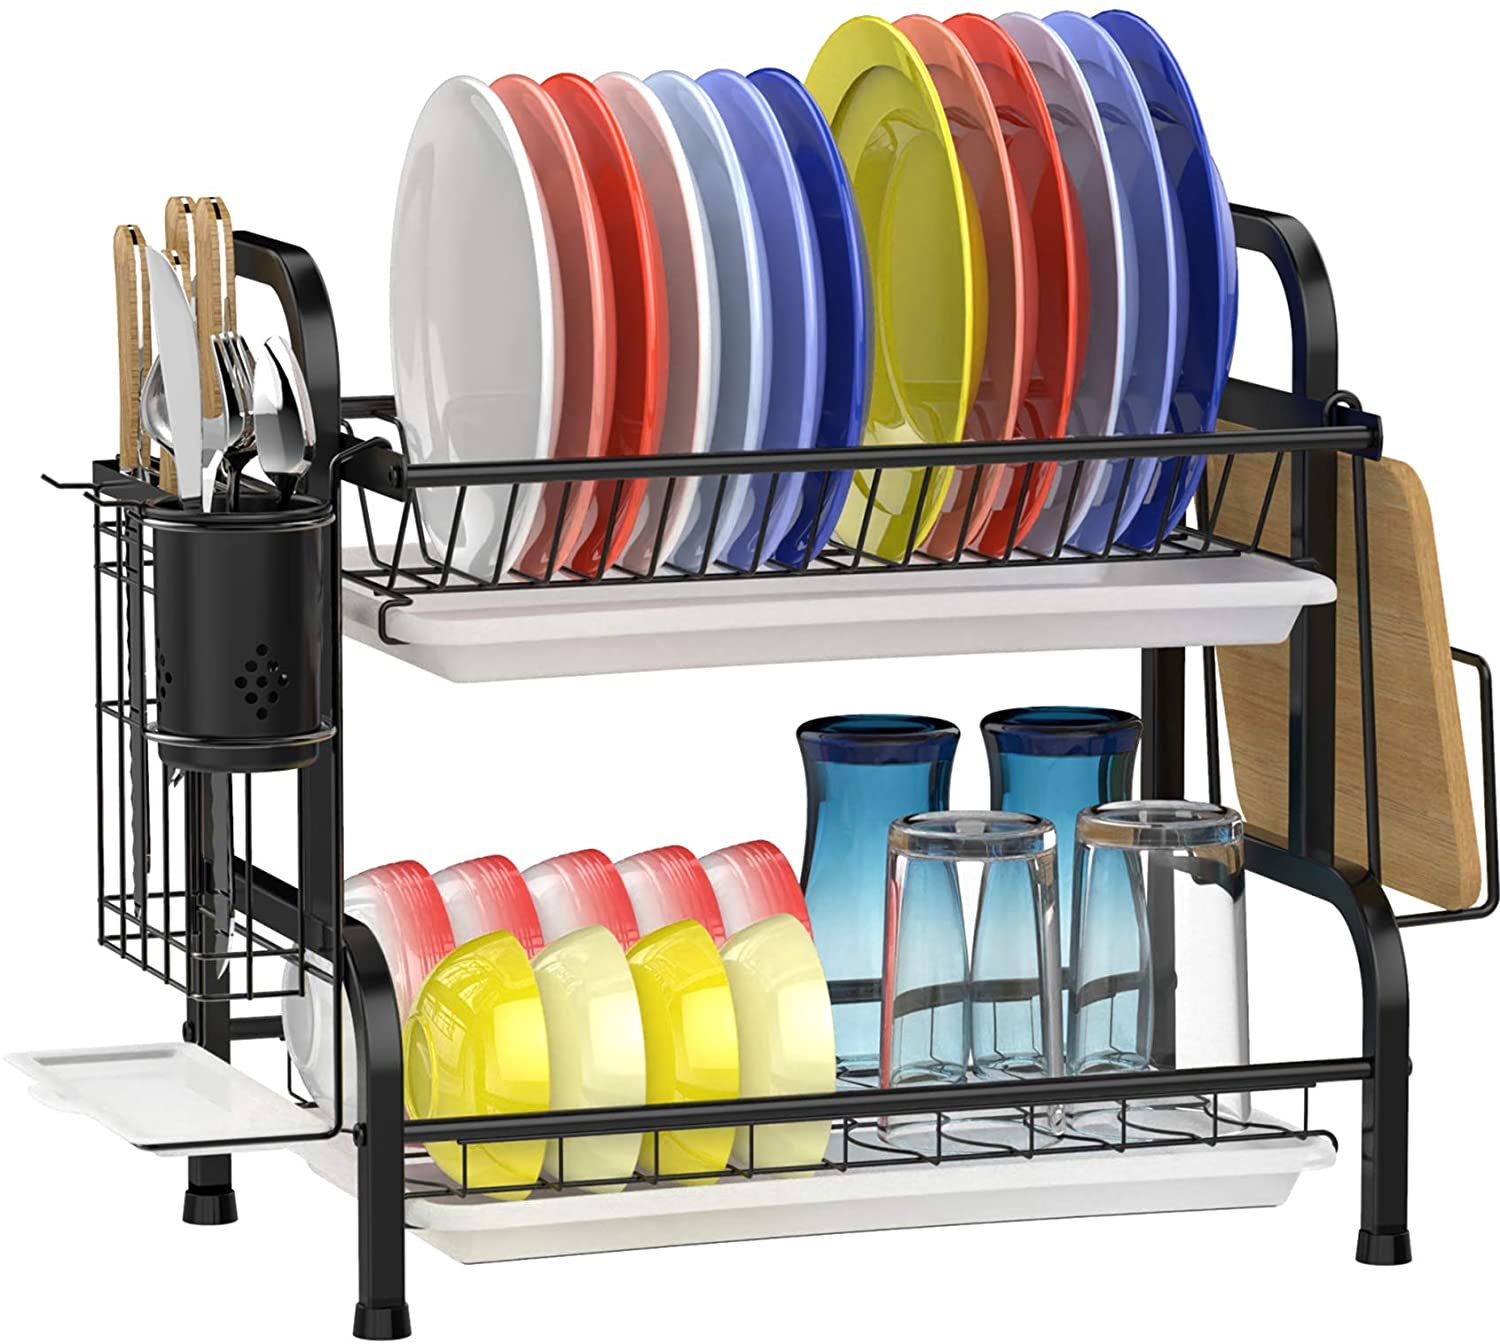 GSlife Stainless Steel 2 Tier Dish Rack